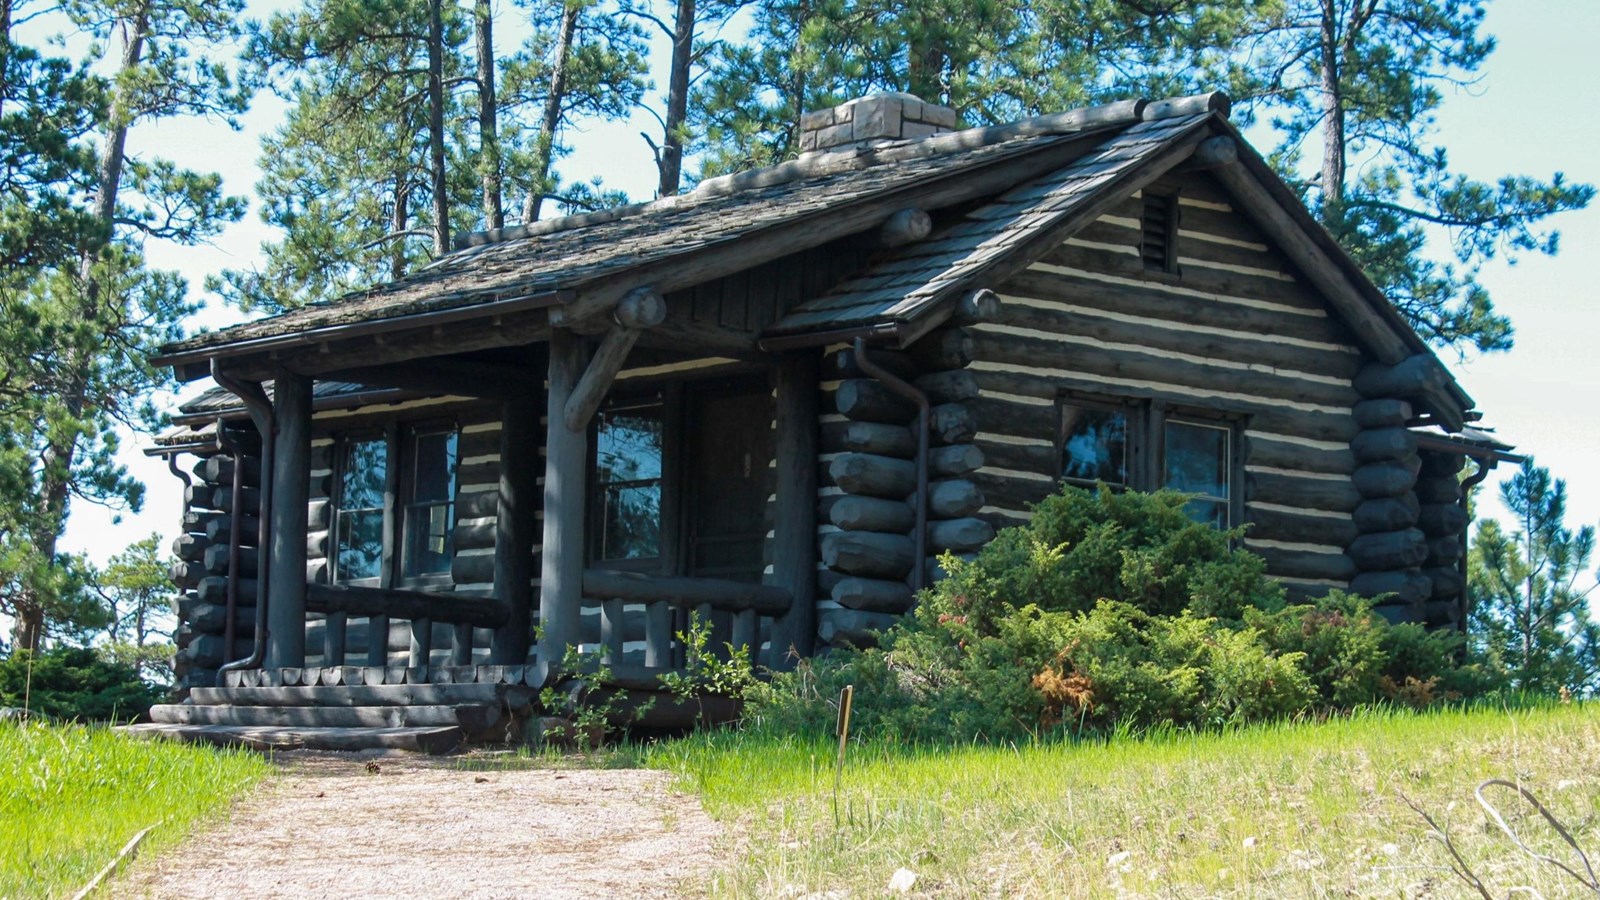 Log cabin along a gravel path in a pine forest